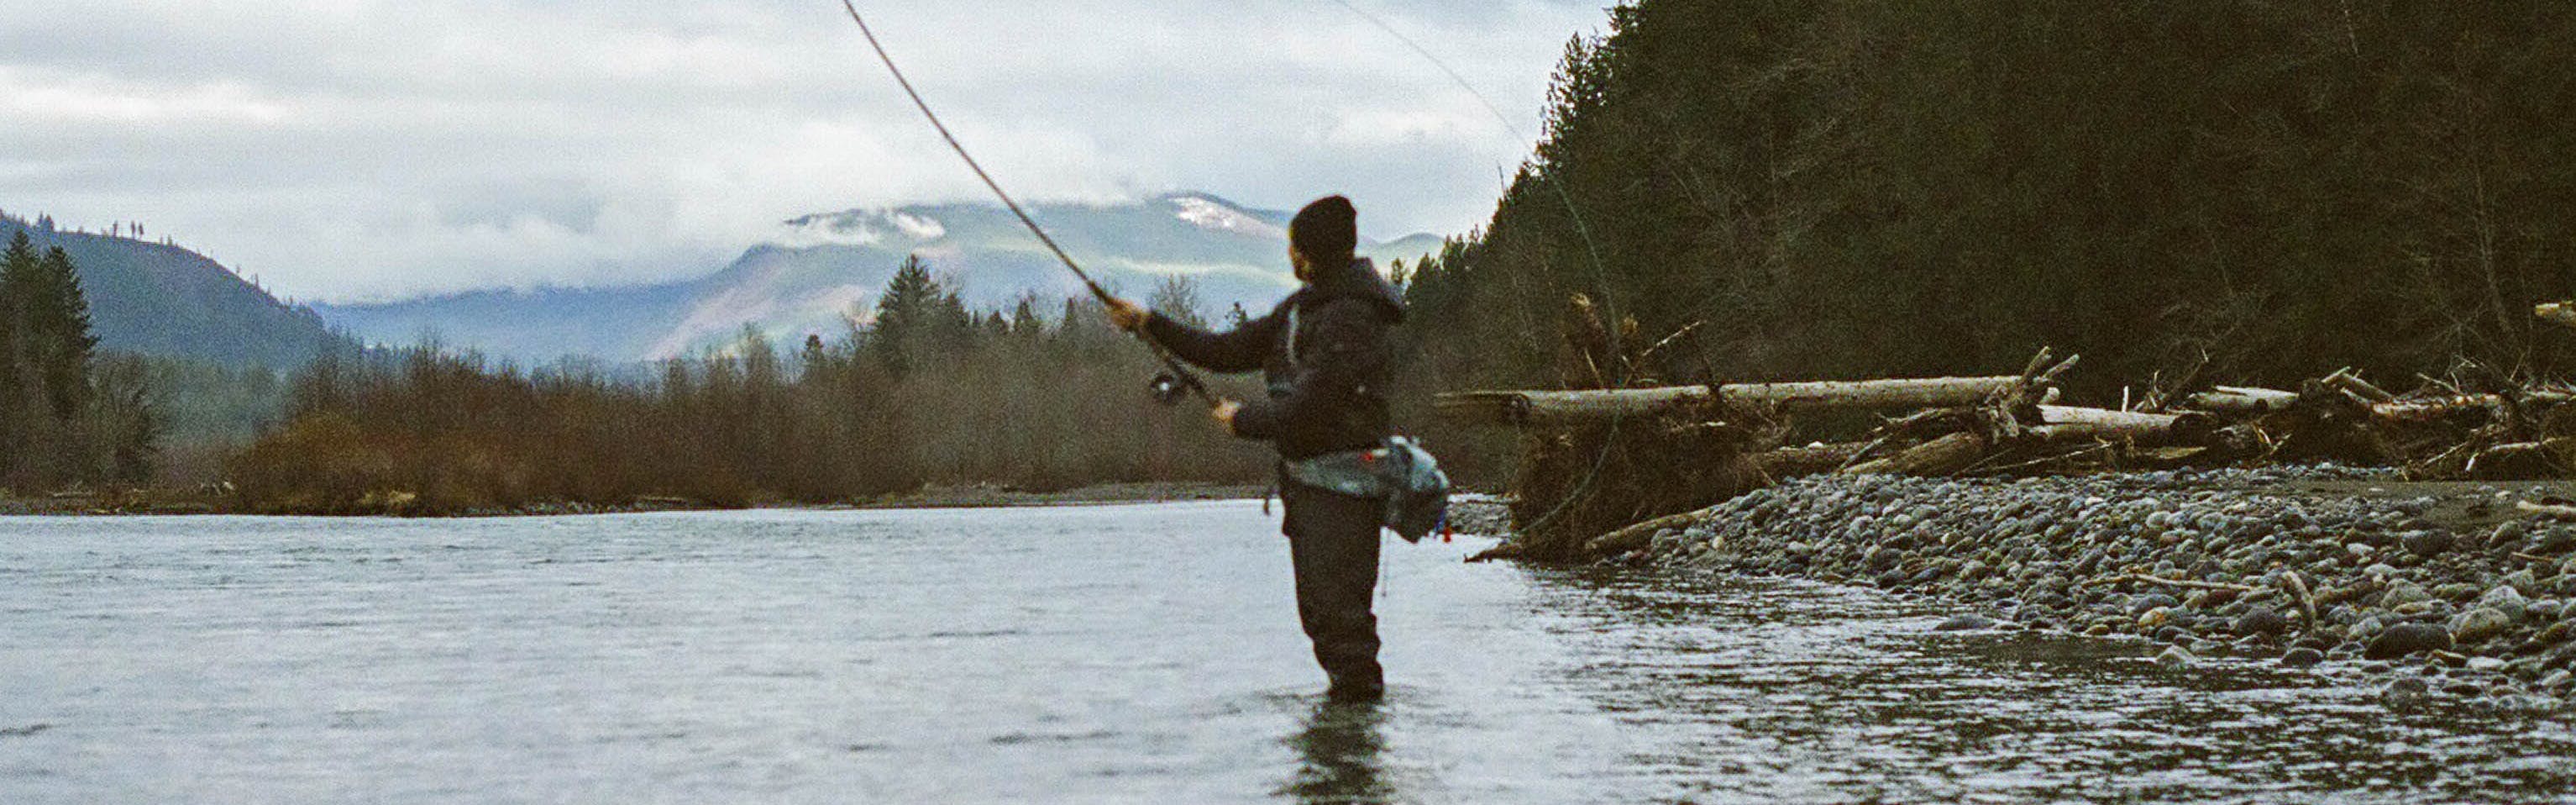 A man stands in the water casting a fly fishing rod